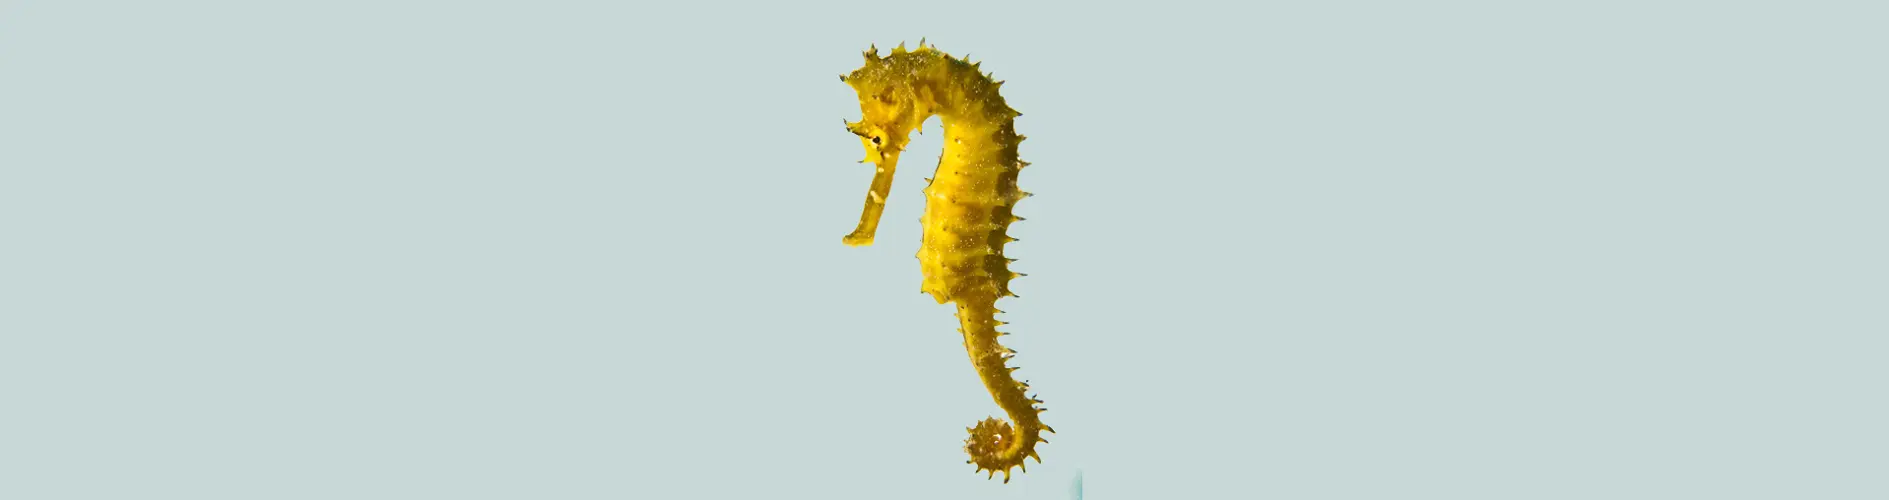 SEAHORSE (HIPPOCAMOUS)